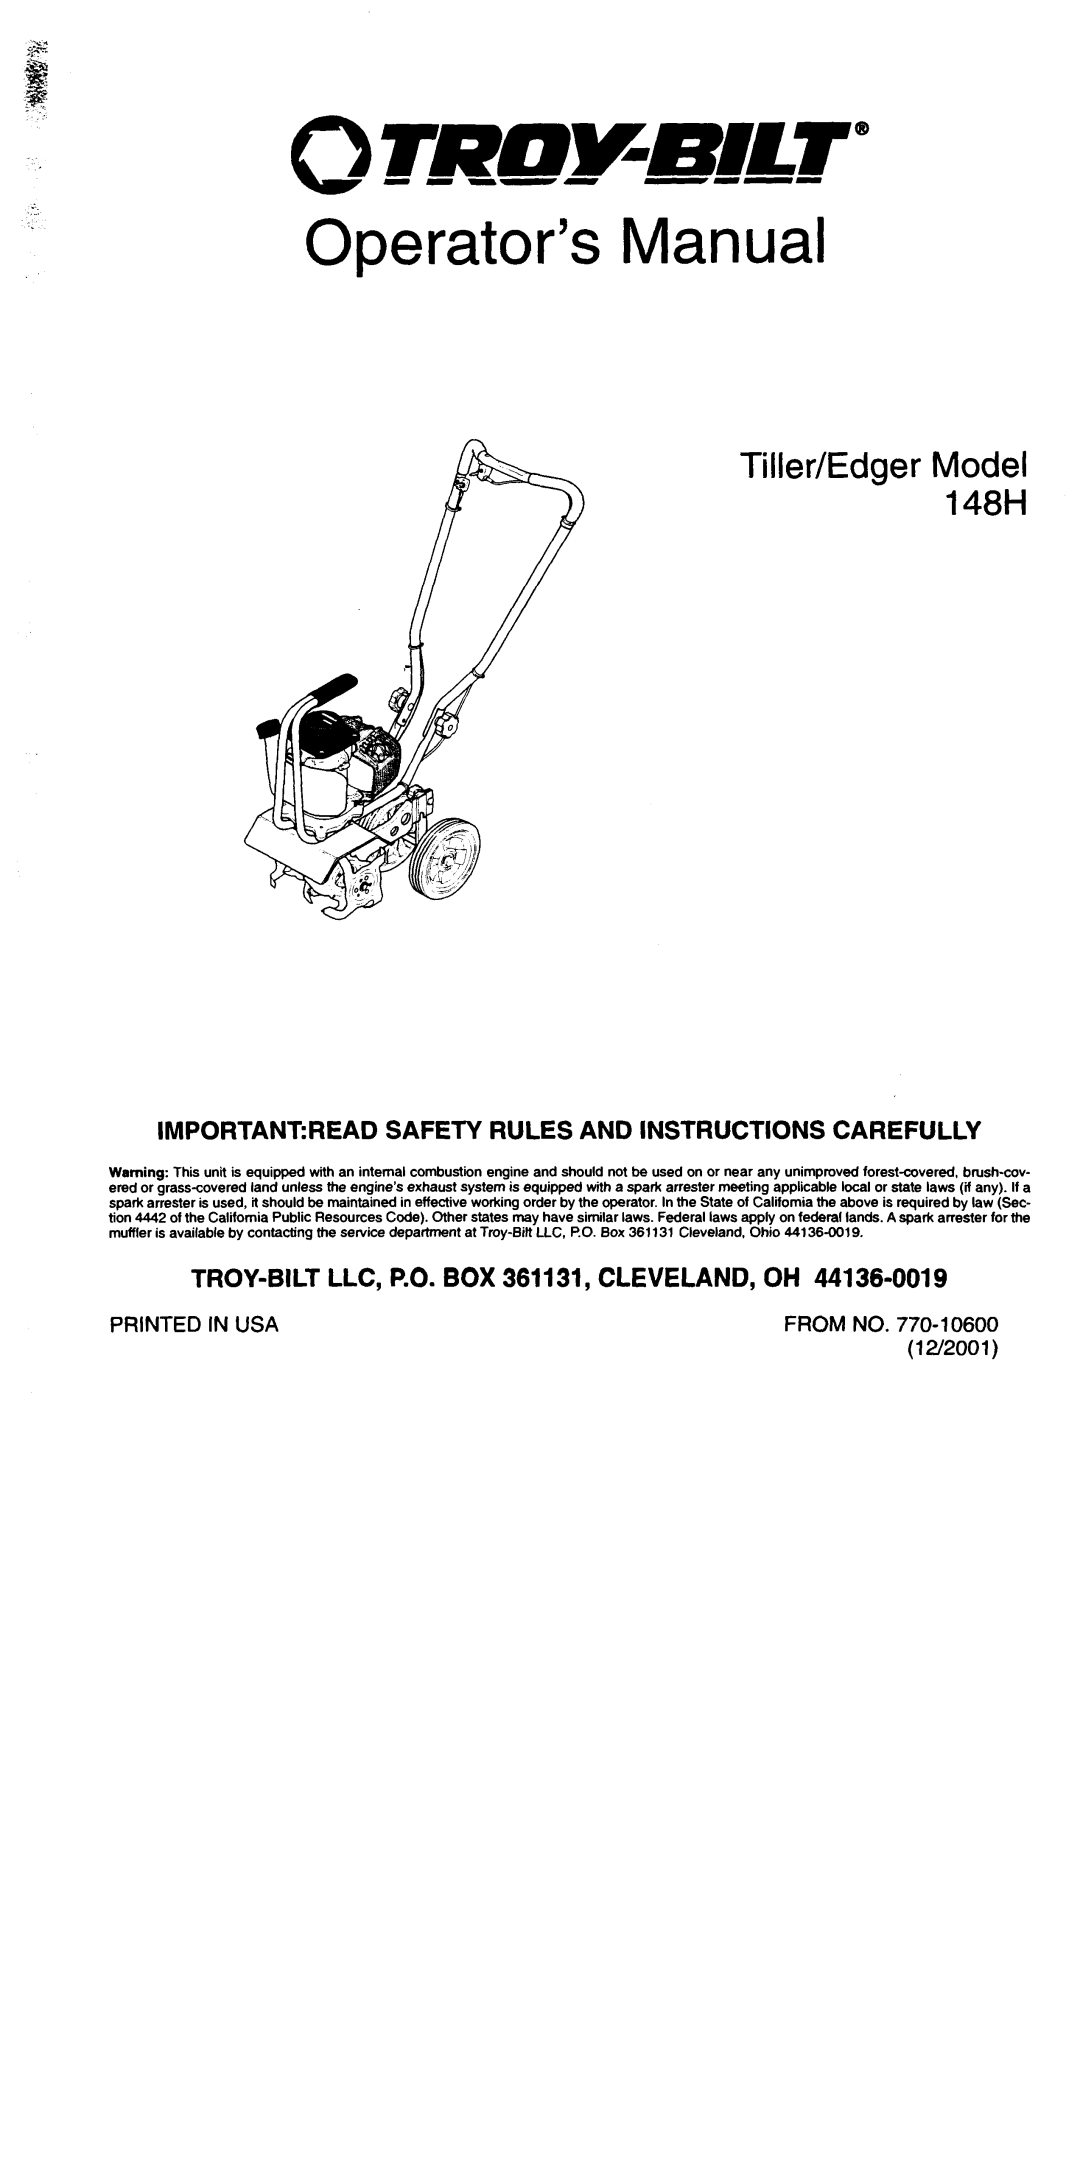 Troy-Bilt 148H manual Importantread Safety Rules And Instructions Carefully, TROY-BILT LLC, P.O. BOX 361131, CLEVELAND, OH 